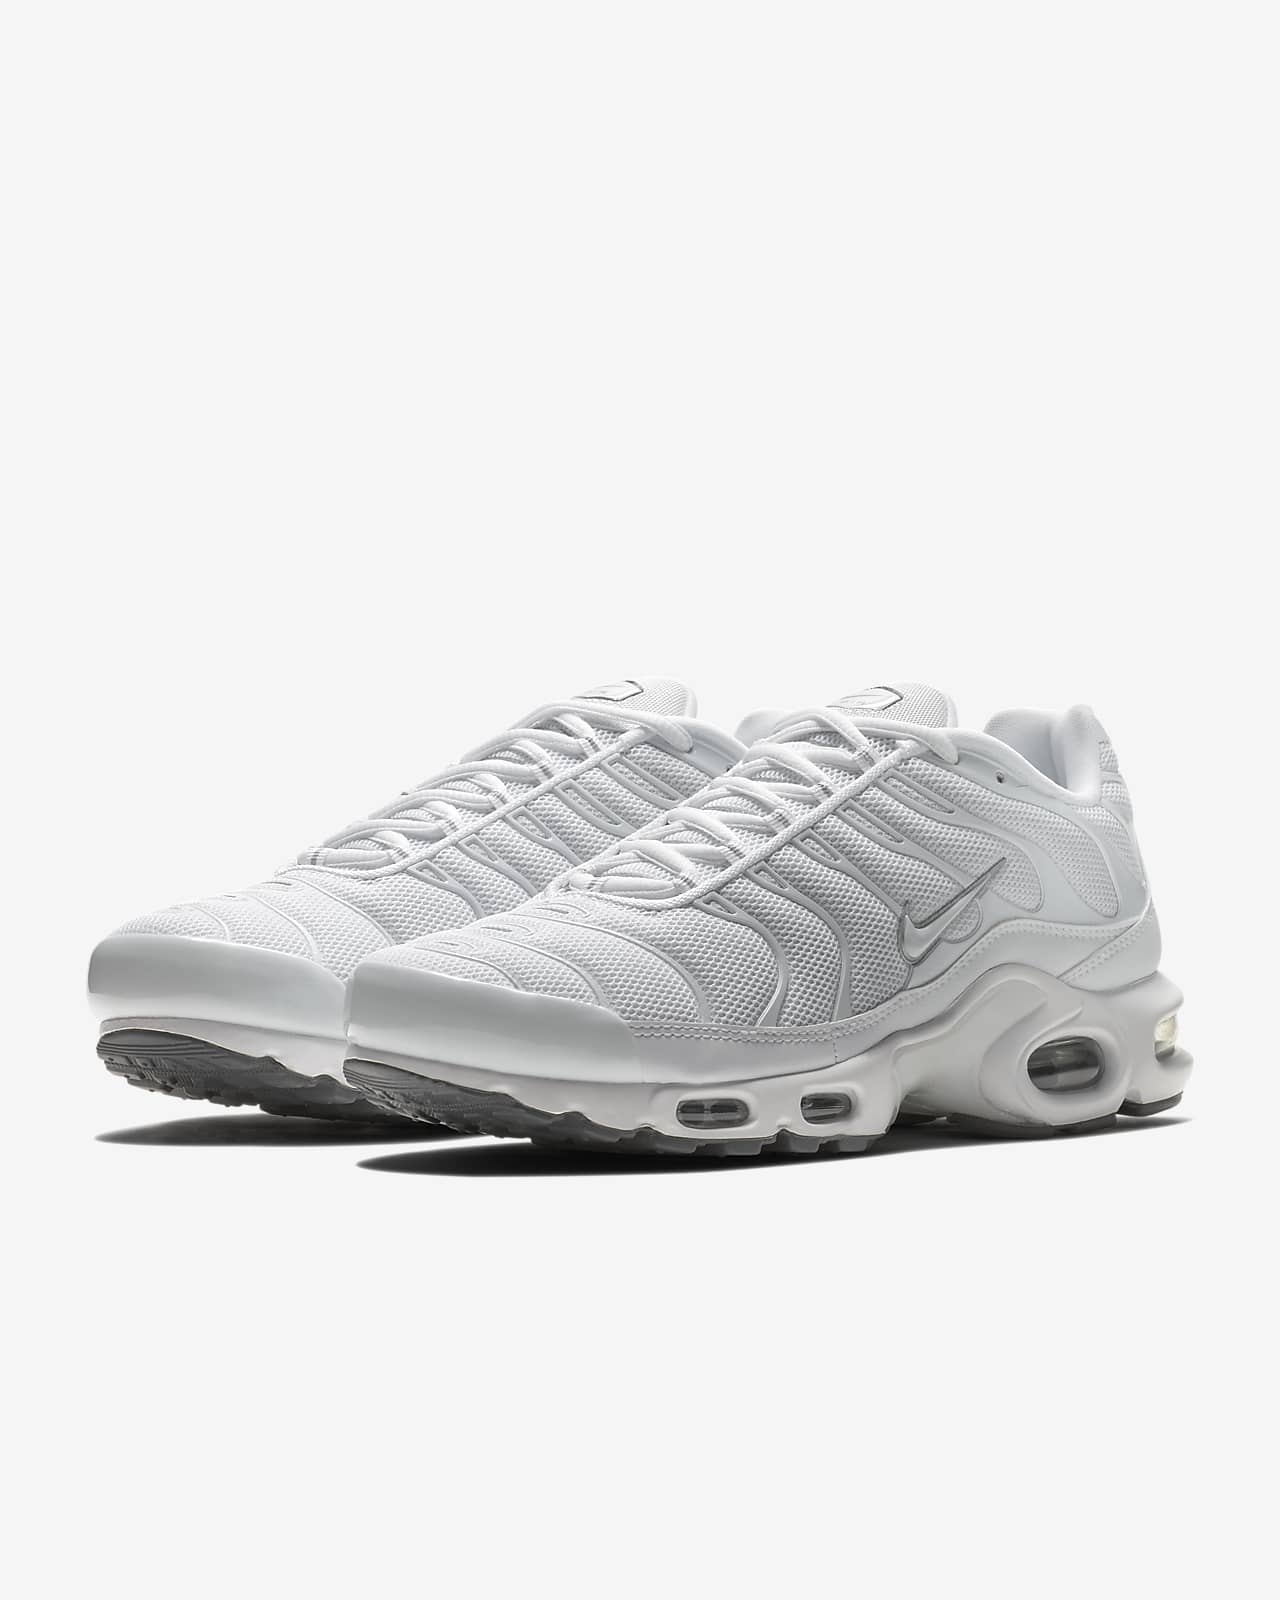 Wafer Inactive Absorb Nike Air Max Plus Men's Shoes. Nike LU